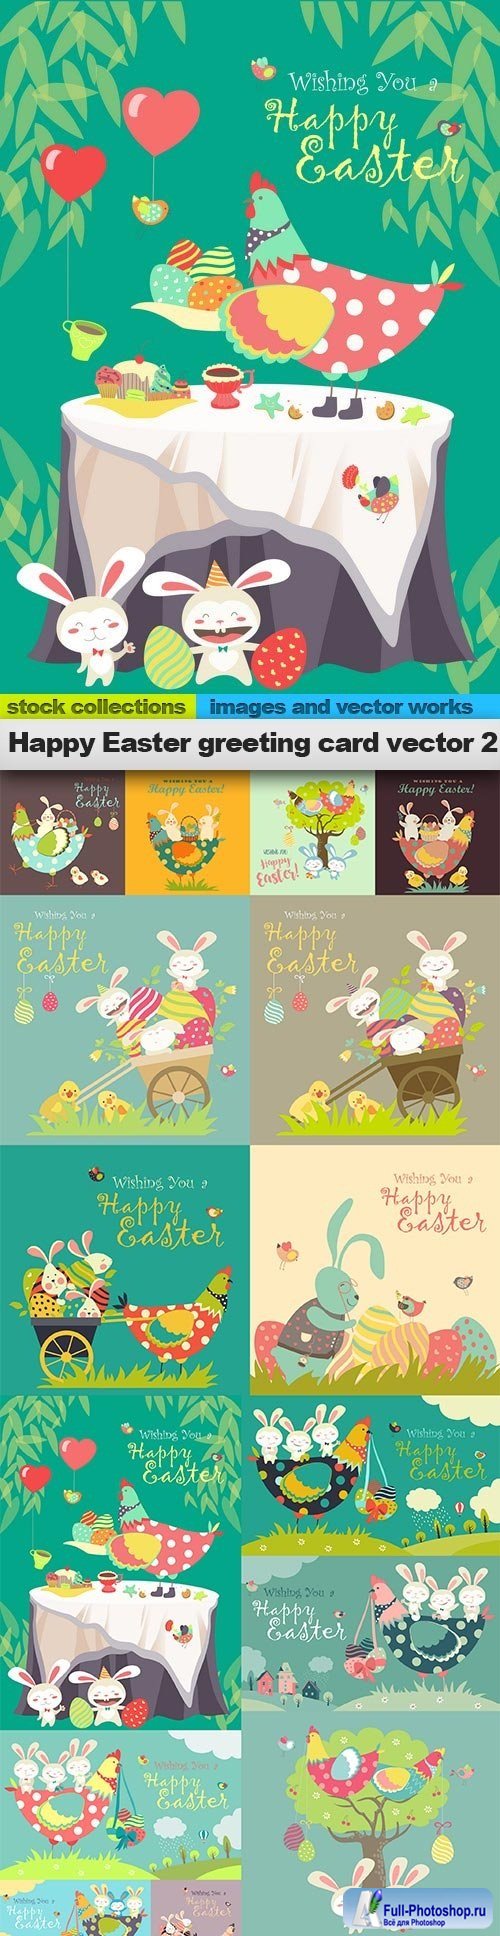 Happy Easter greeting card vector 2, 15 x EPS